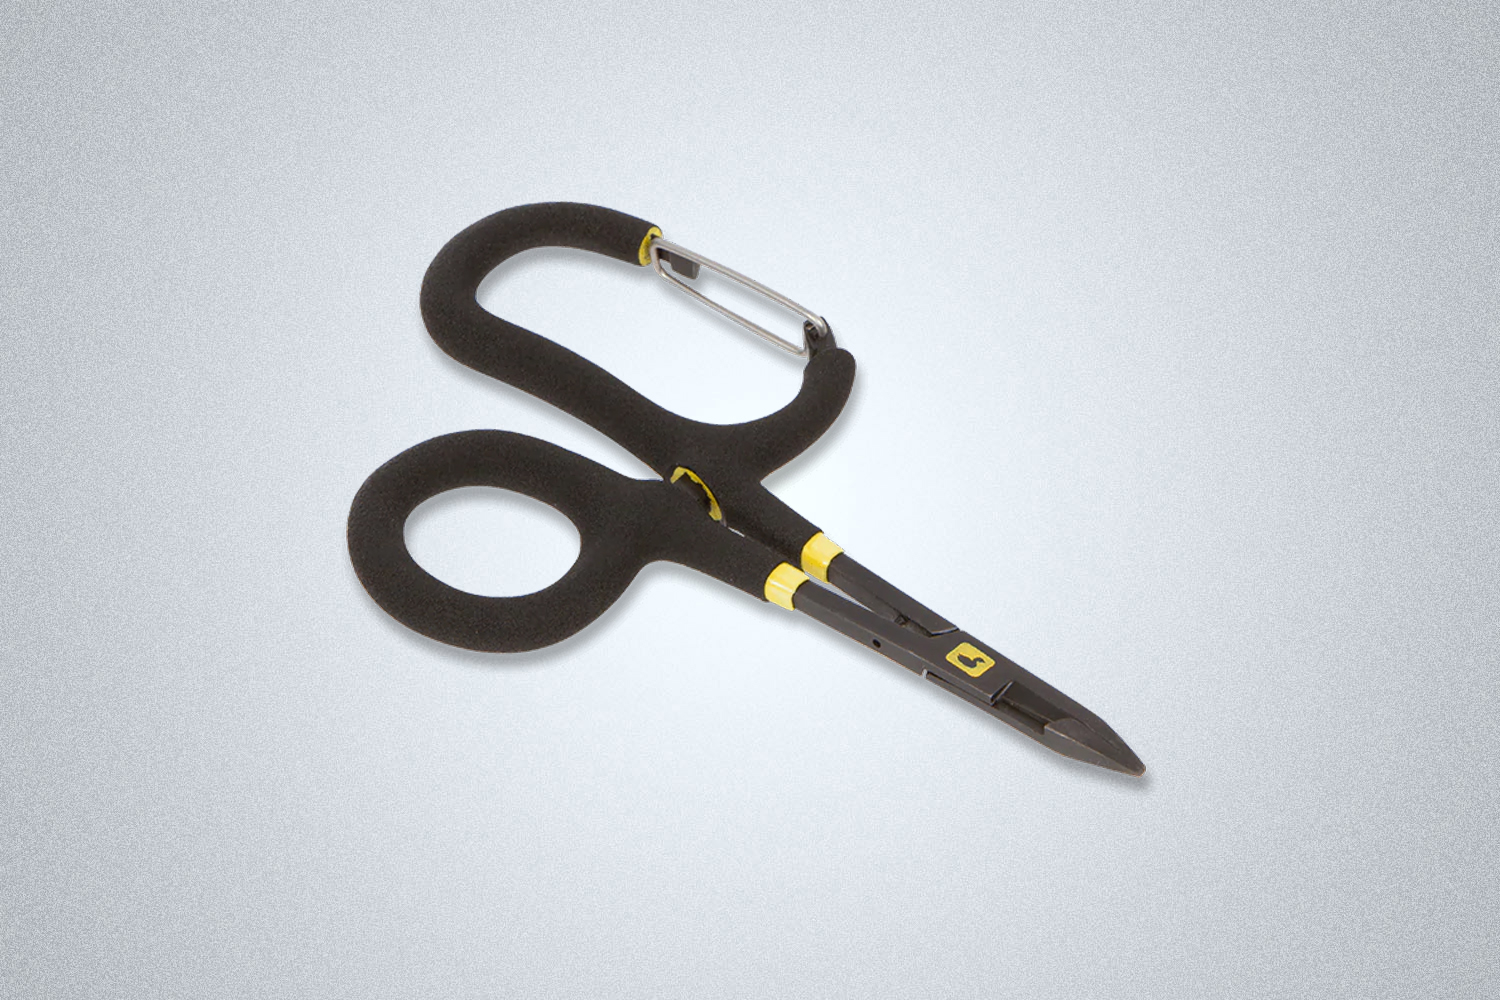 The Loon Rogue Quickdraw Forceps are the best pair of beginner pliers for fly fishing